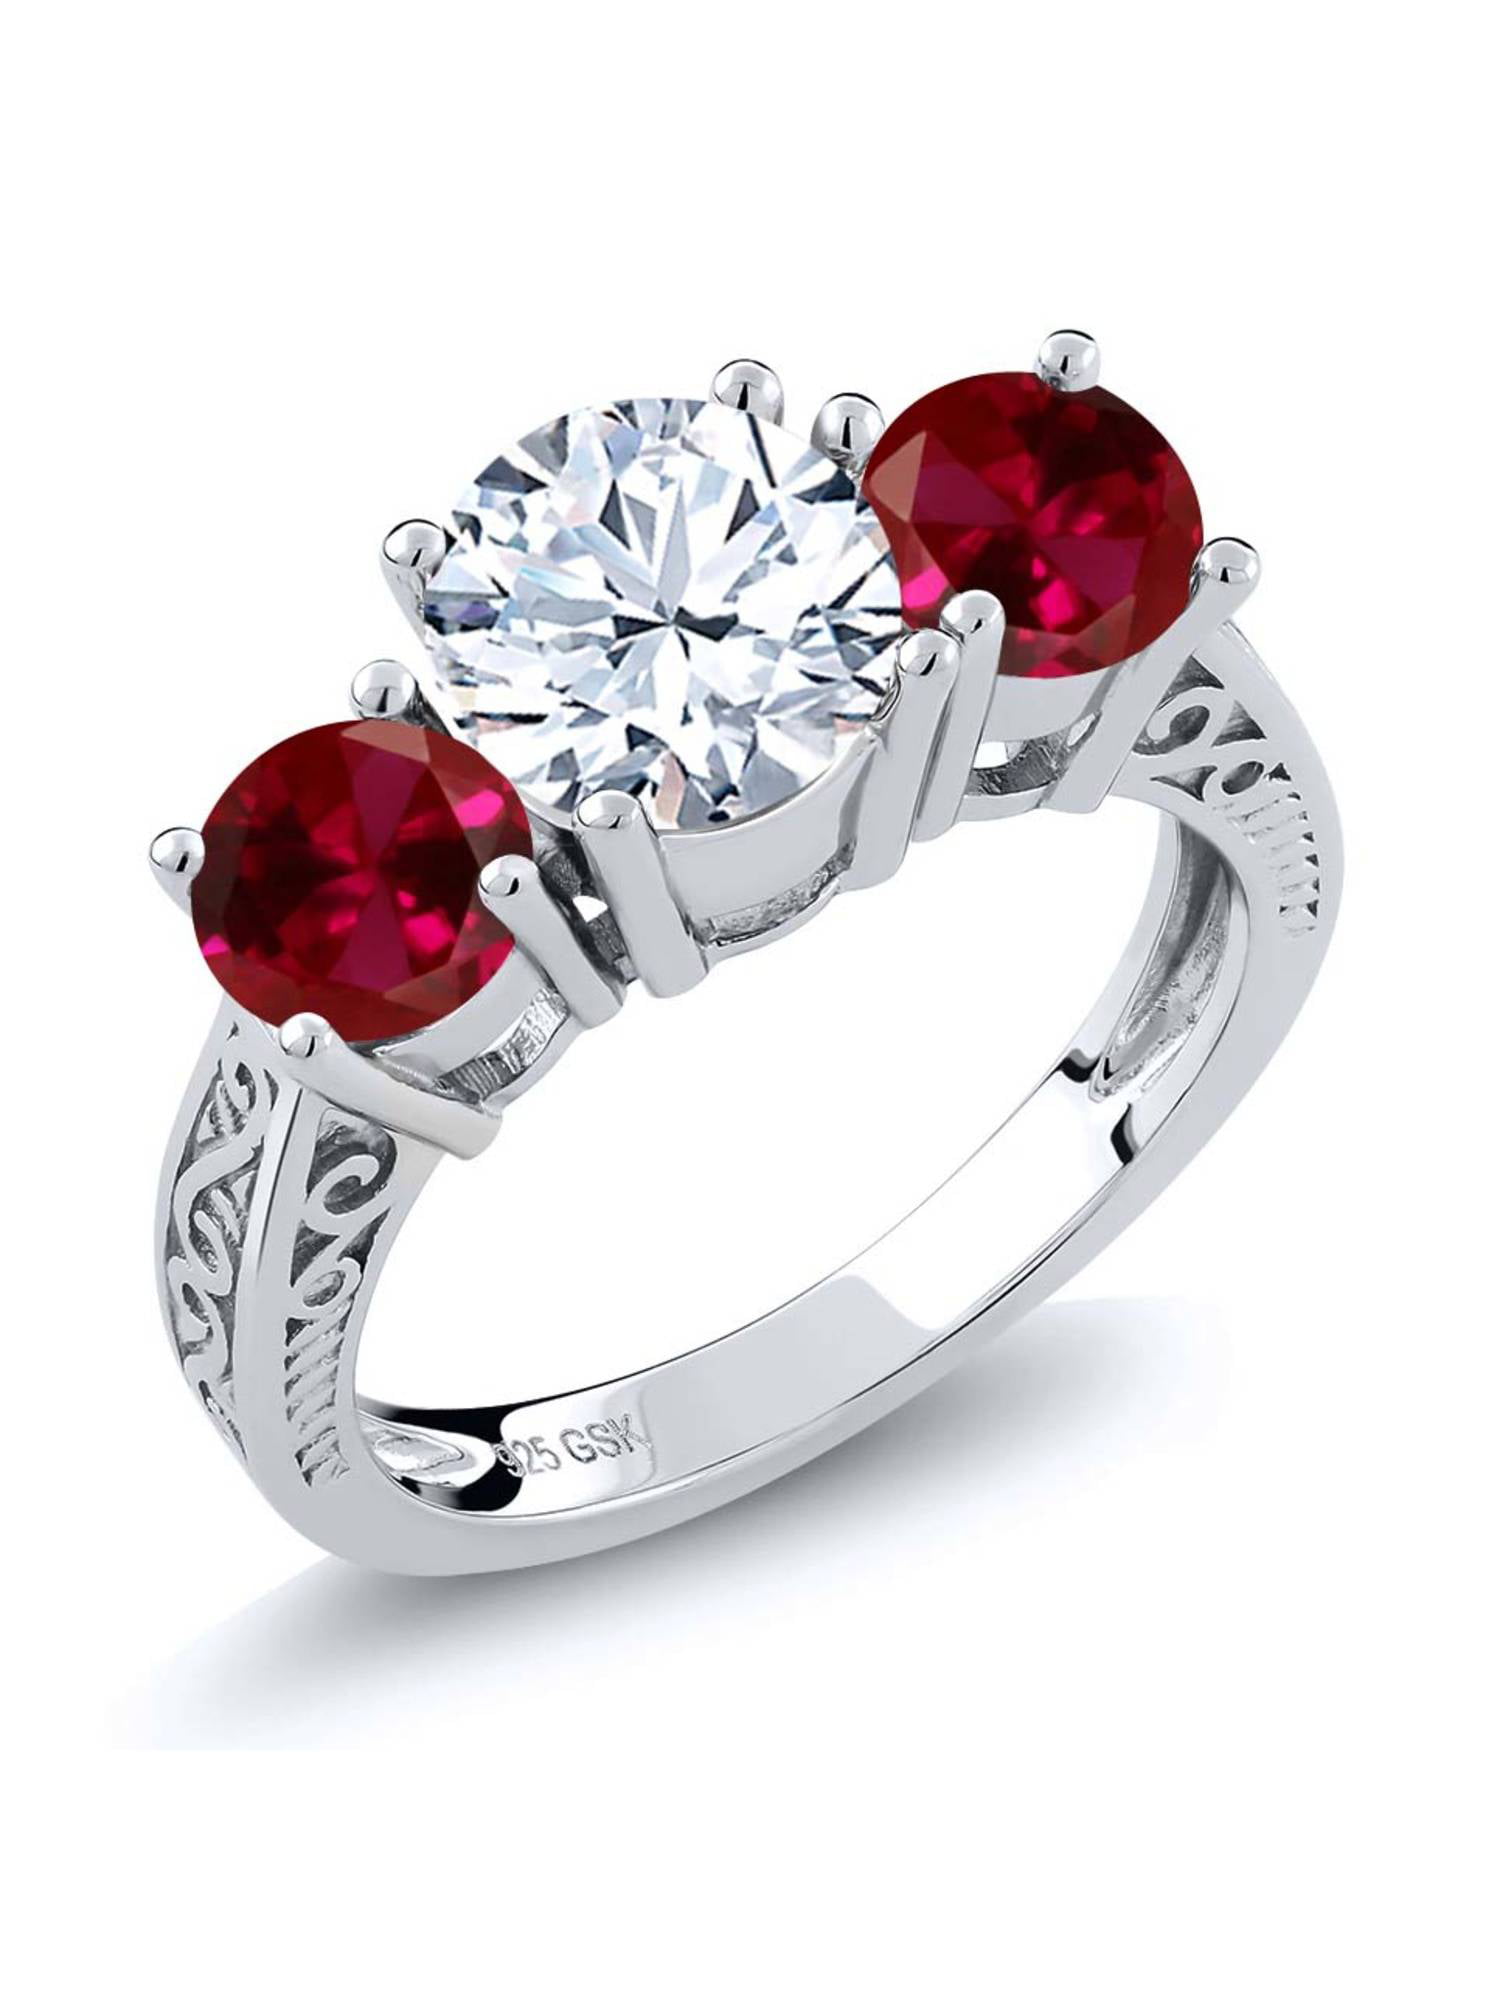 Gem Stone King 1.20 Ct Round White Topaz Red Ruby 925 Yellow Gold Plated Silver 3-Stone Ring